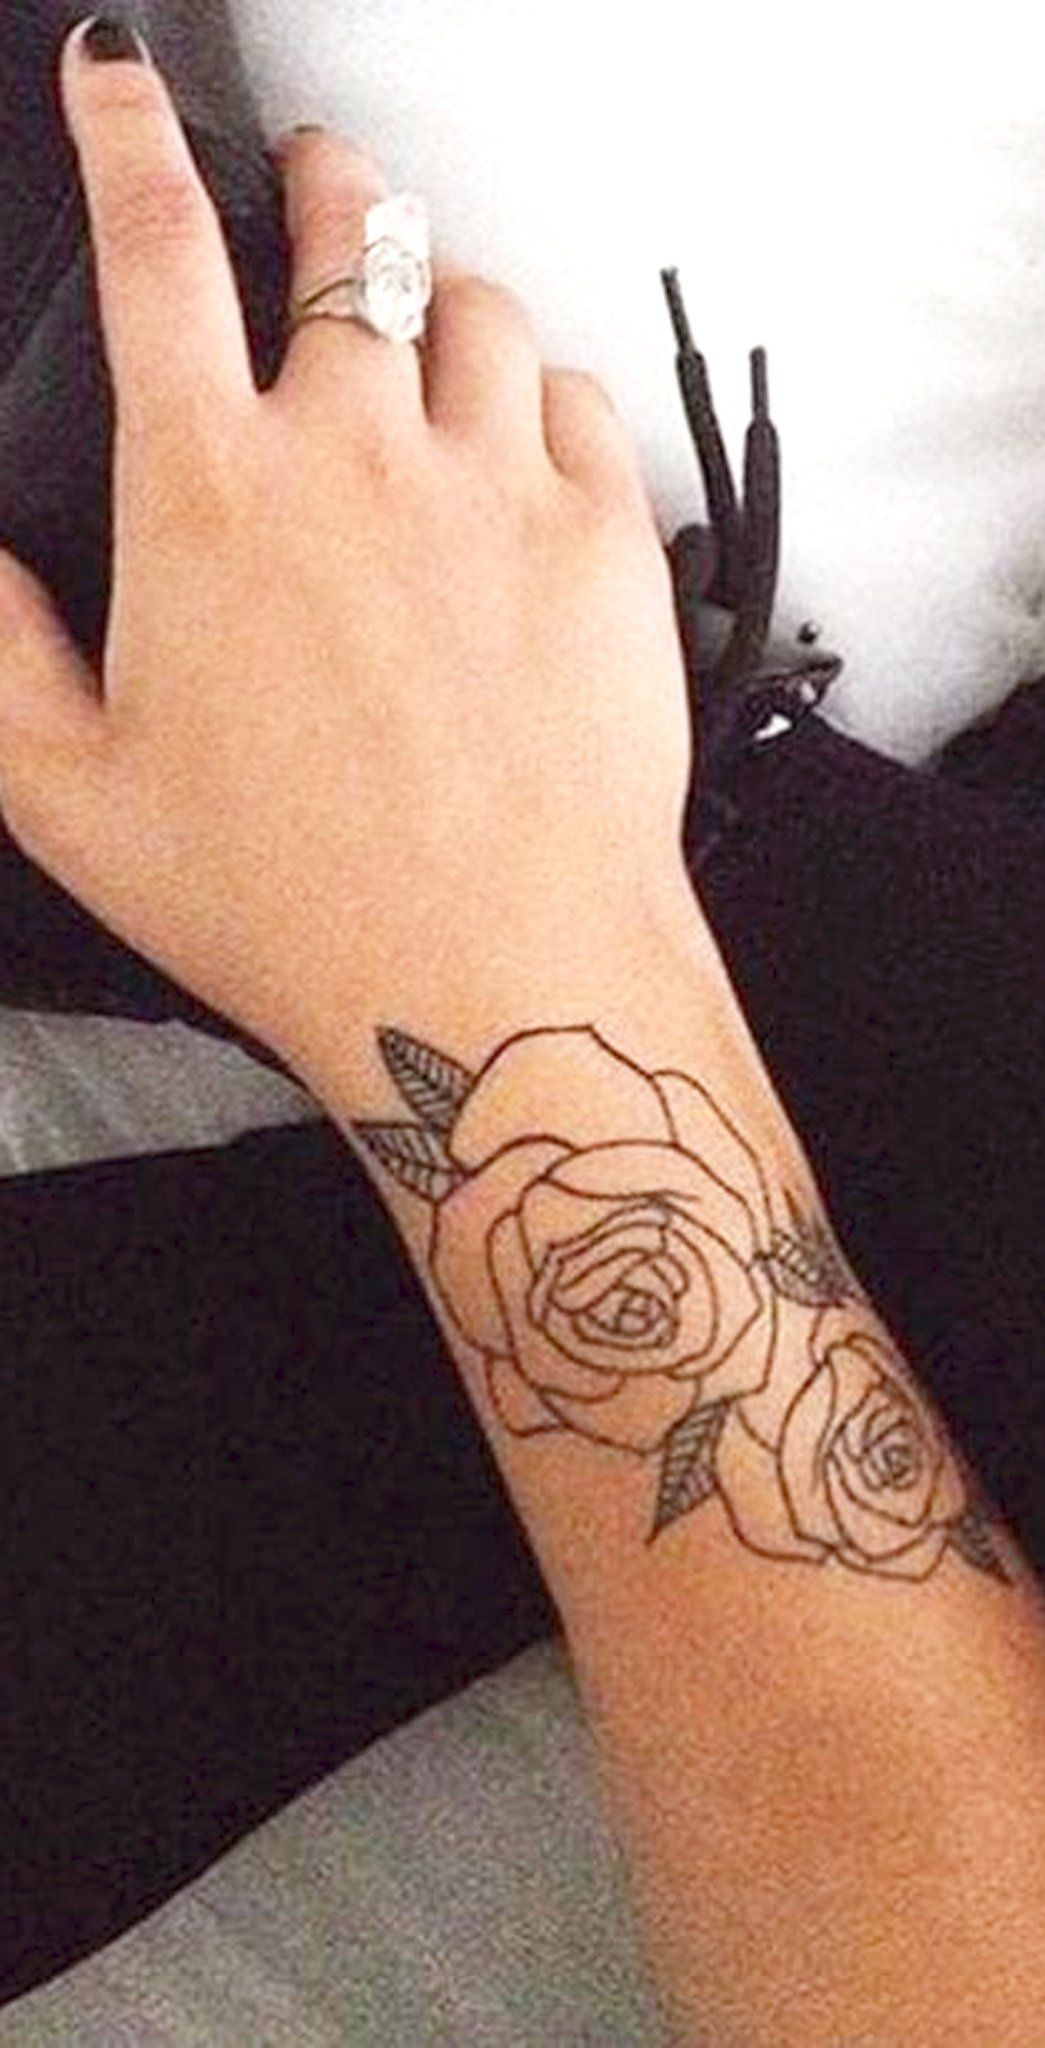 Realistic Minimal Rose Outer Forearm Tattoo Ideas For Women intended for sizing 1045 X 2048